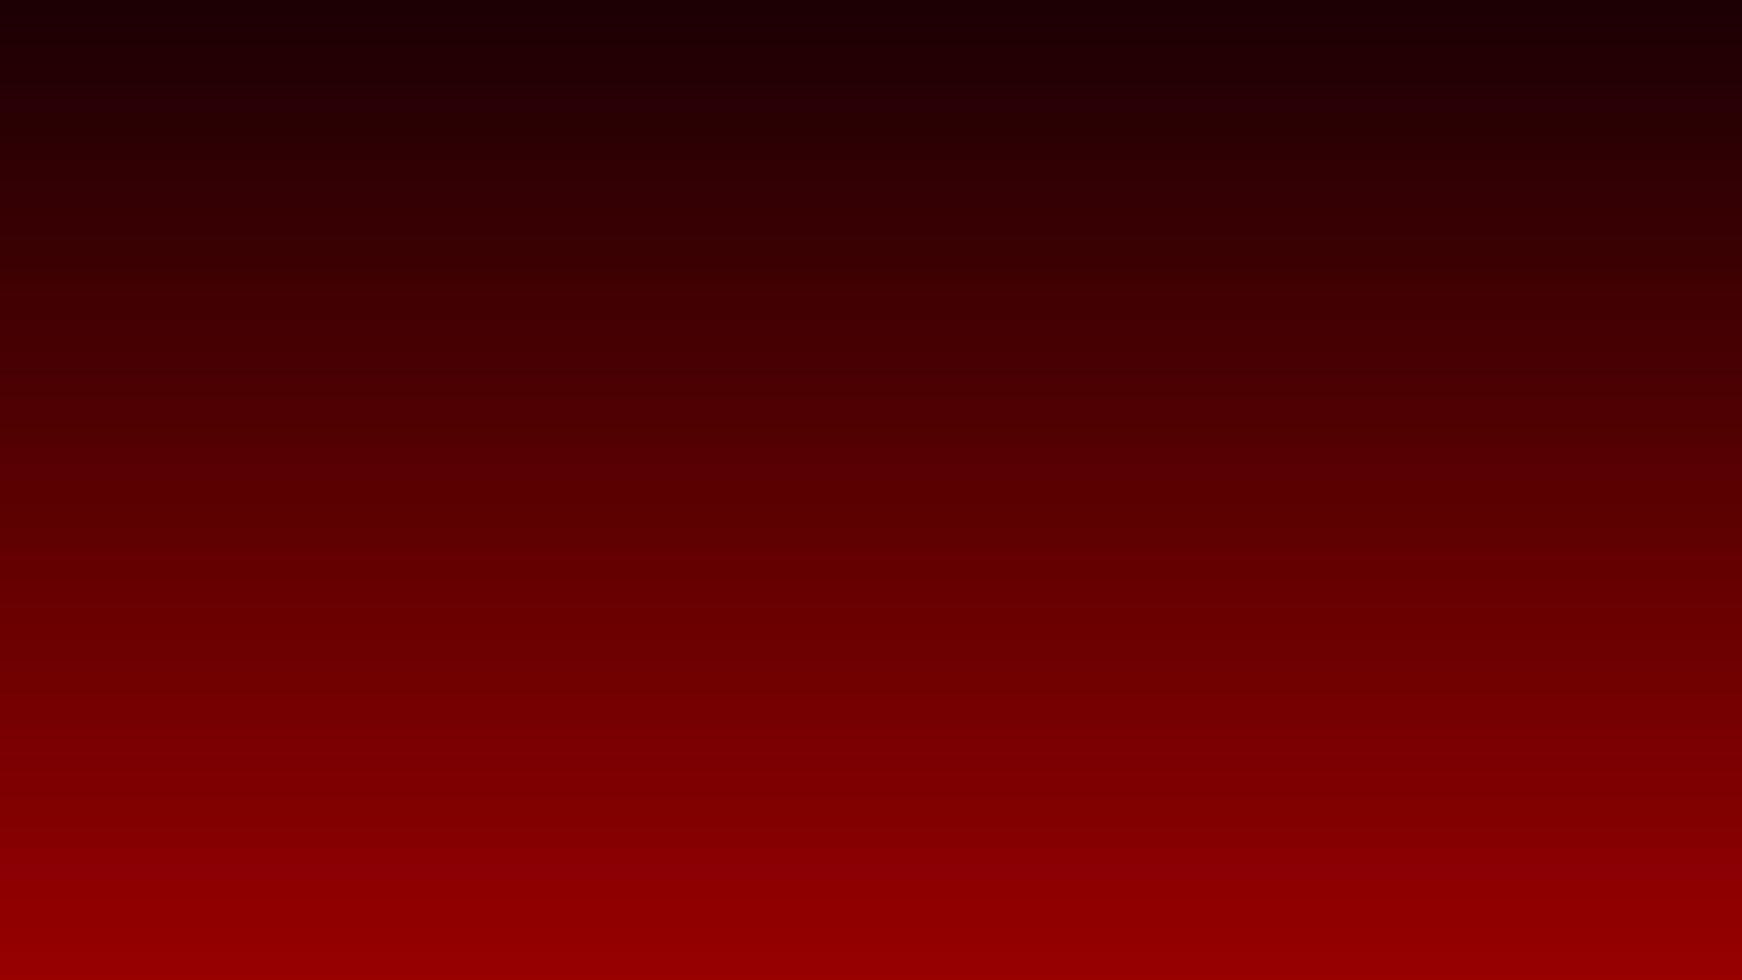 Abstract gradient background dark red suitable for background, presentation, website, card, promotion and social media concept vector